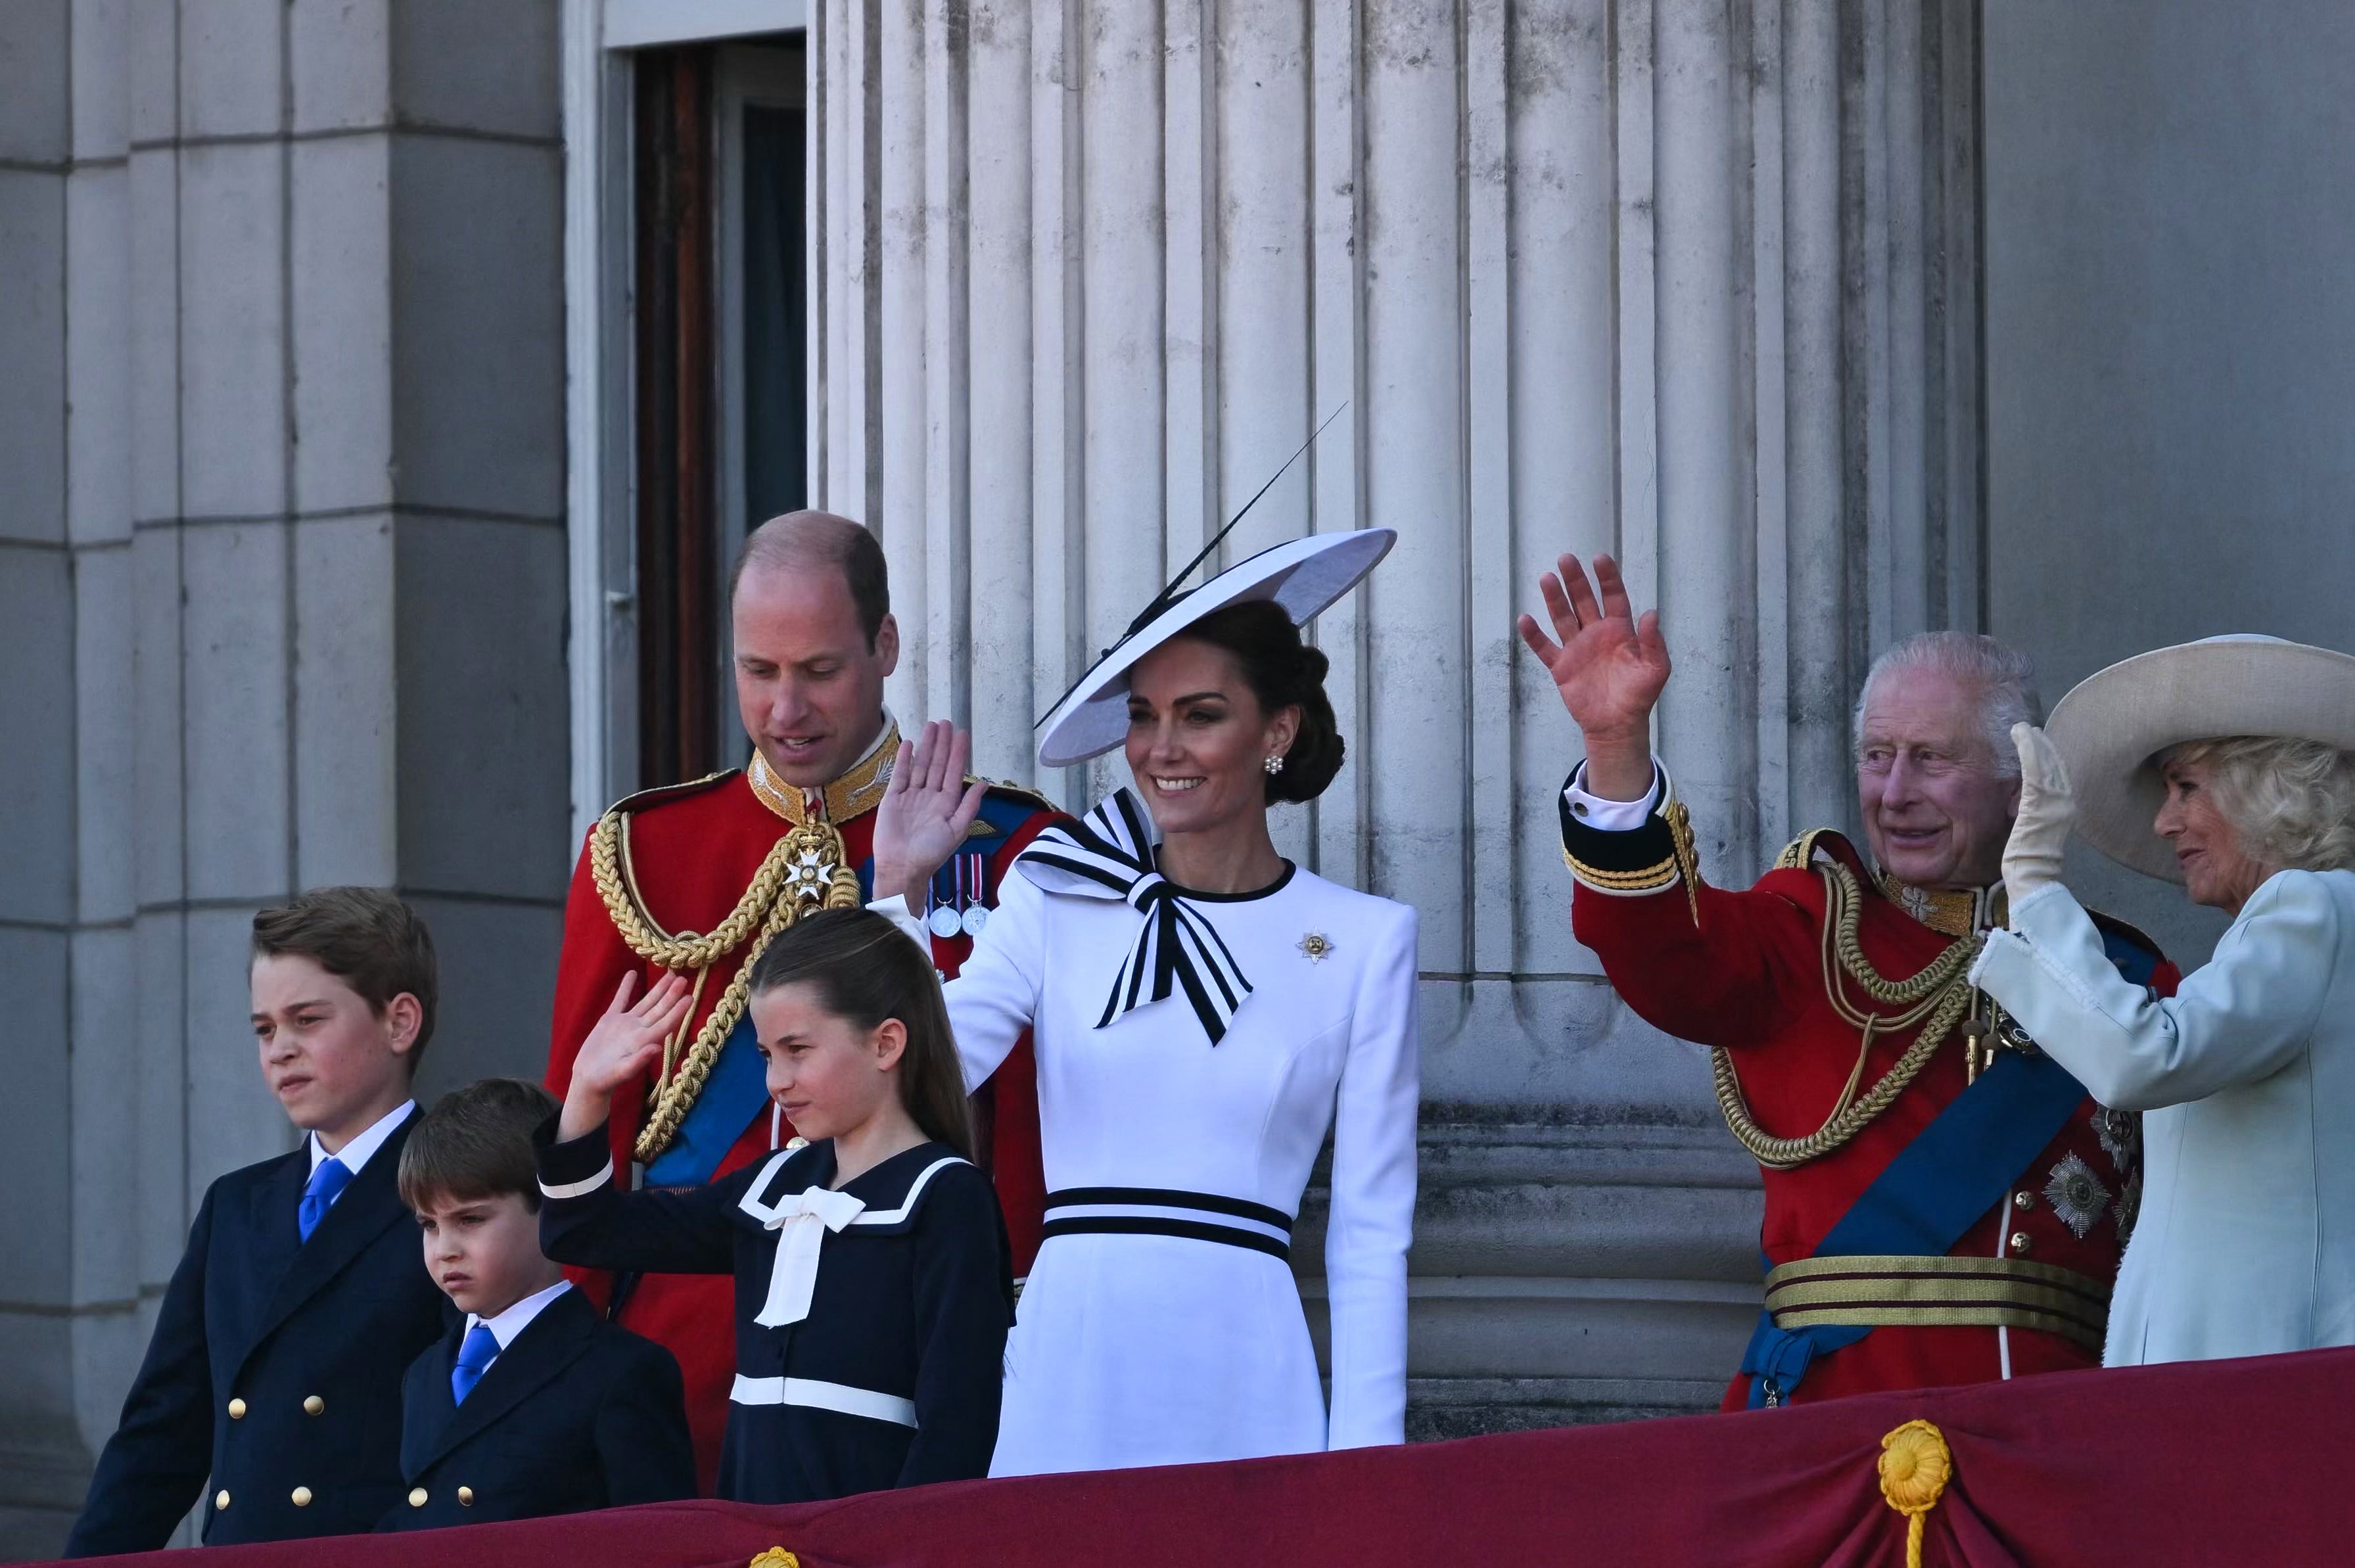 The royal family appear united together on the balcony at the finale of the Trooping the Colour